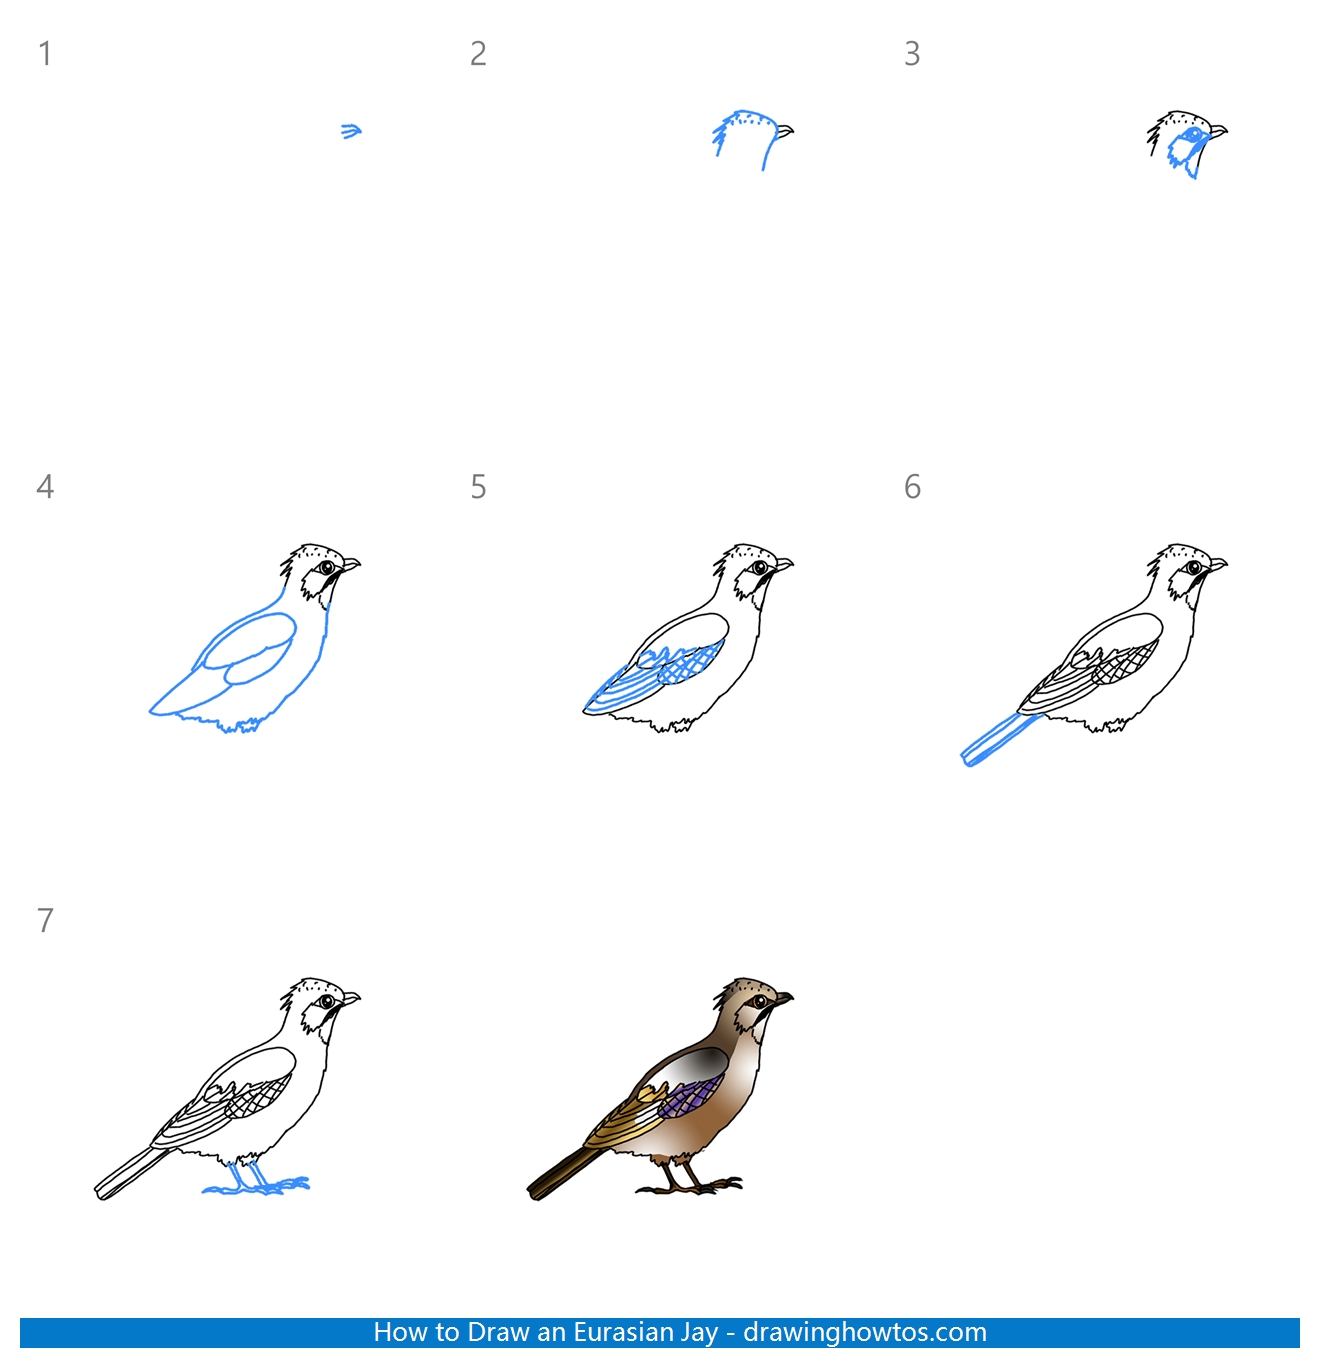 How to Draw a Eurasian Jay Step by Step